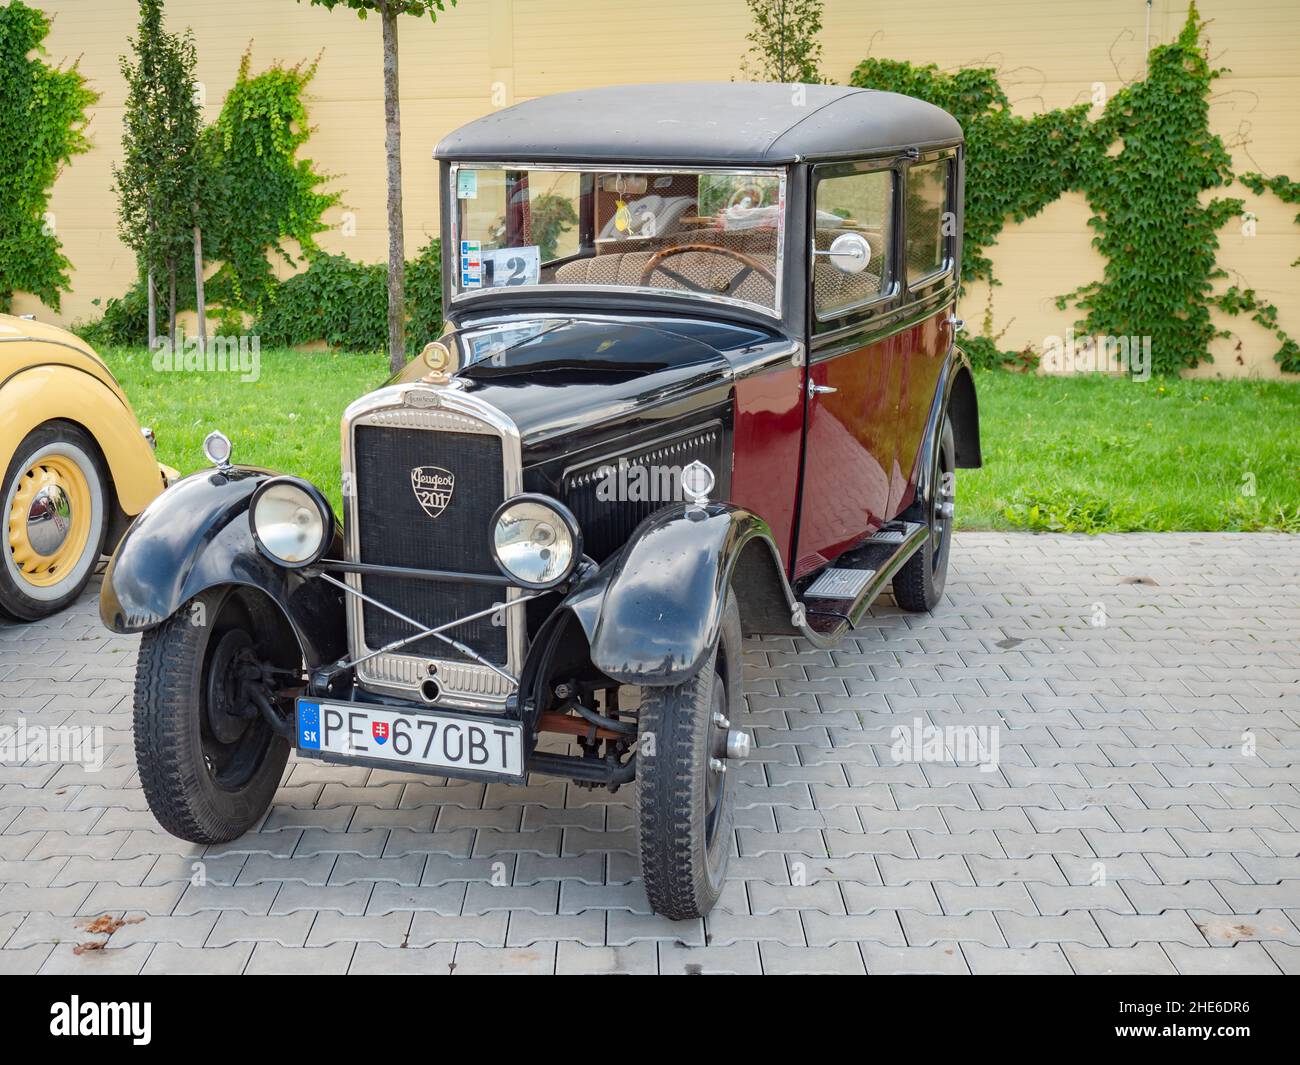 Palavsky Oldtimer, the vintage rally show at Winery Zajeci, Czechia. 27th of August, 2021. Peugeot 201, vintage car.  Historical cars open competition Stock Photo